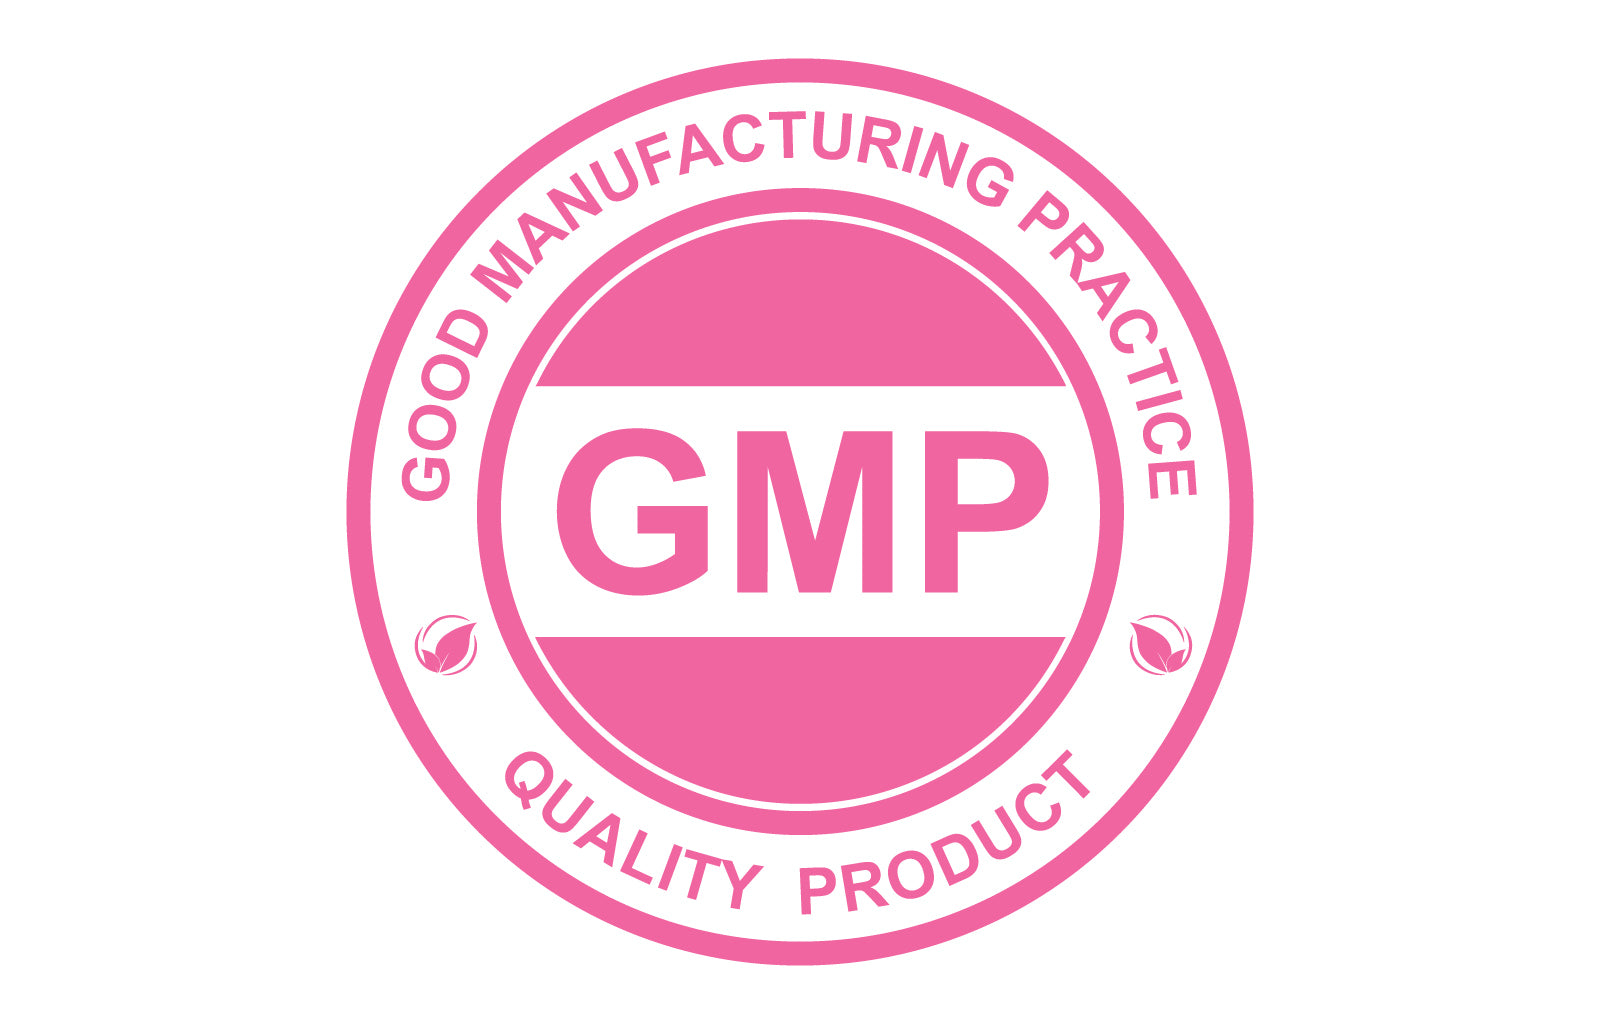 Featured image of the logo for Good Manufacturing Practices (GMP) indicating compliance and that Happy Hippo is a Quality Product